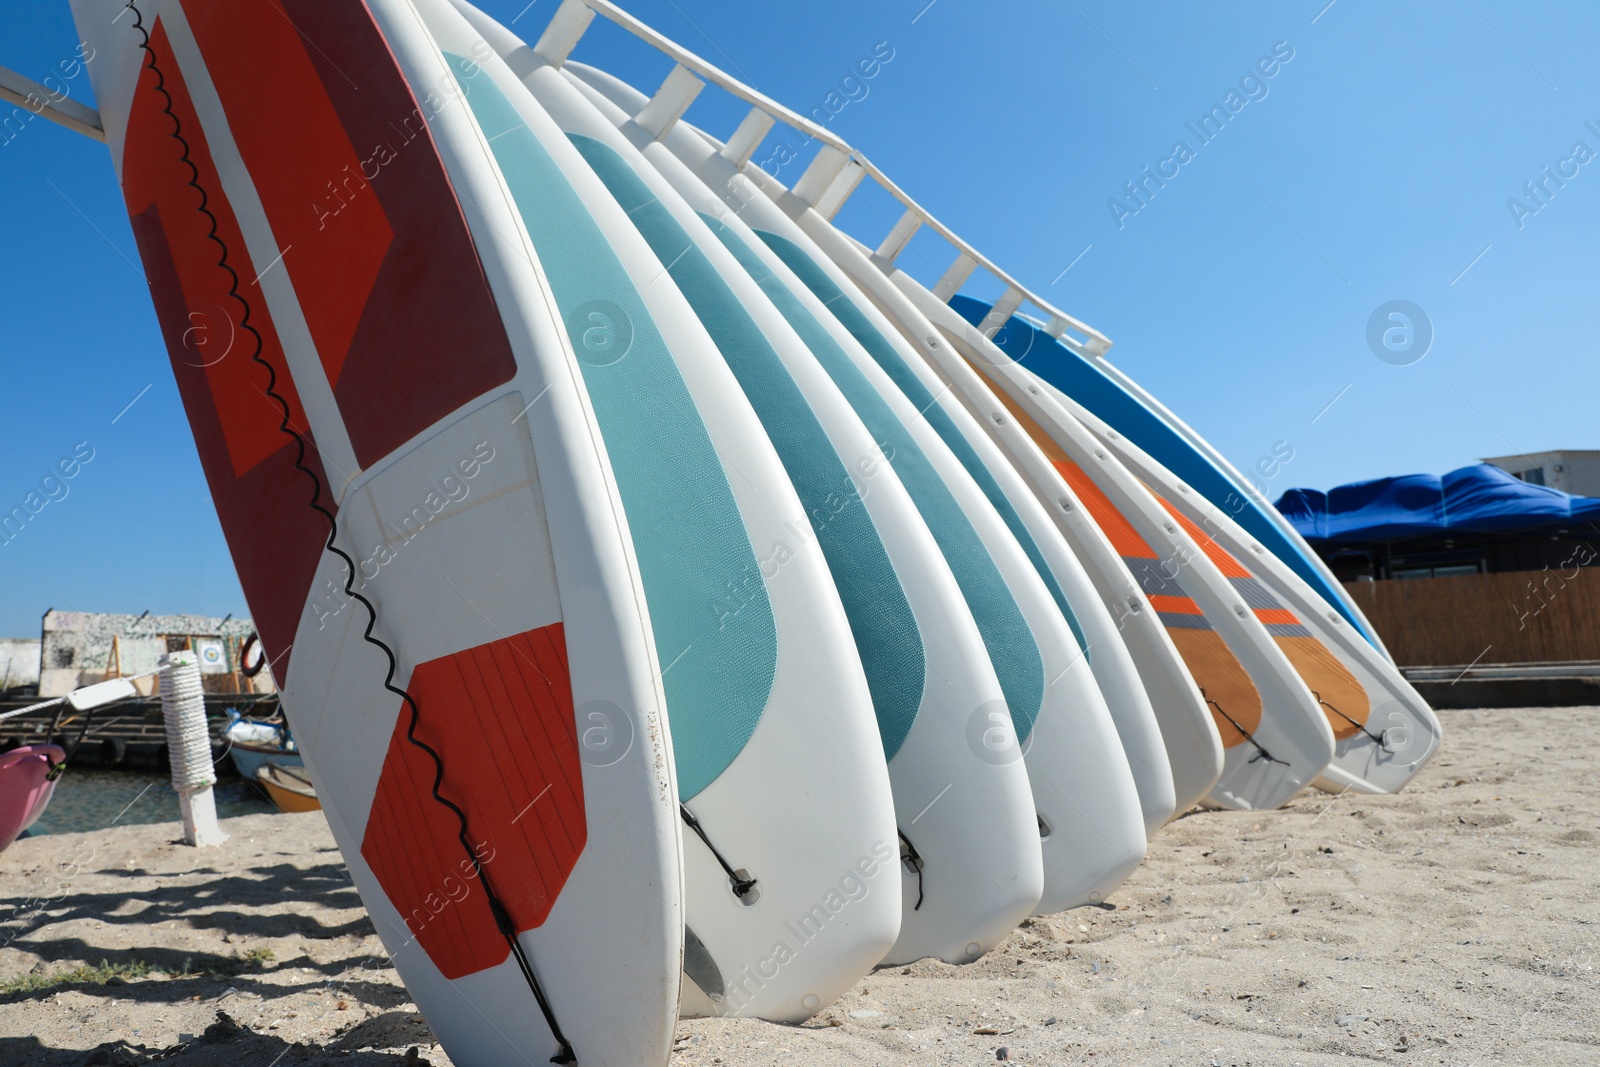 Photo of Rack with colorful paddle boards on sand near sea